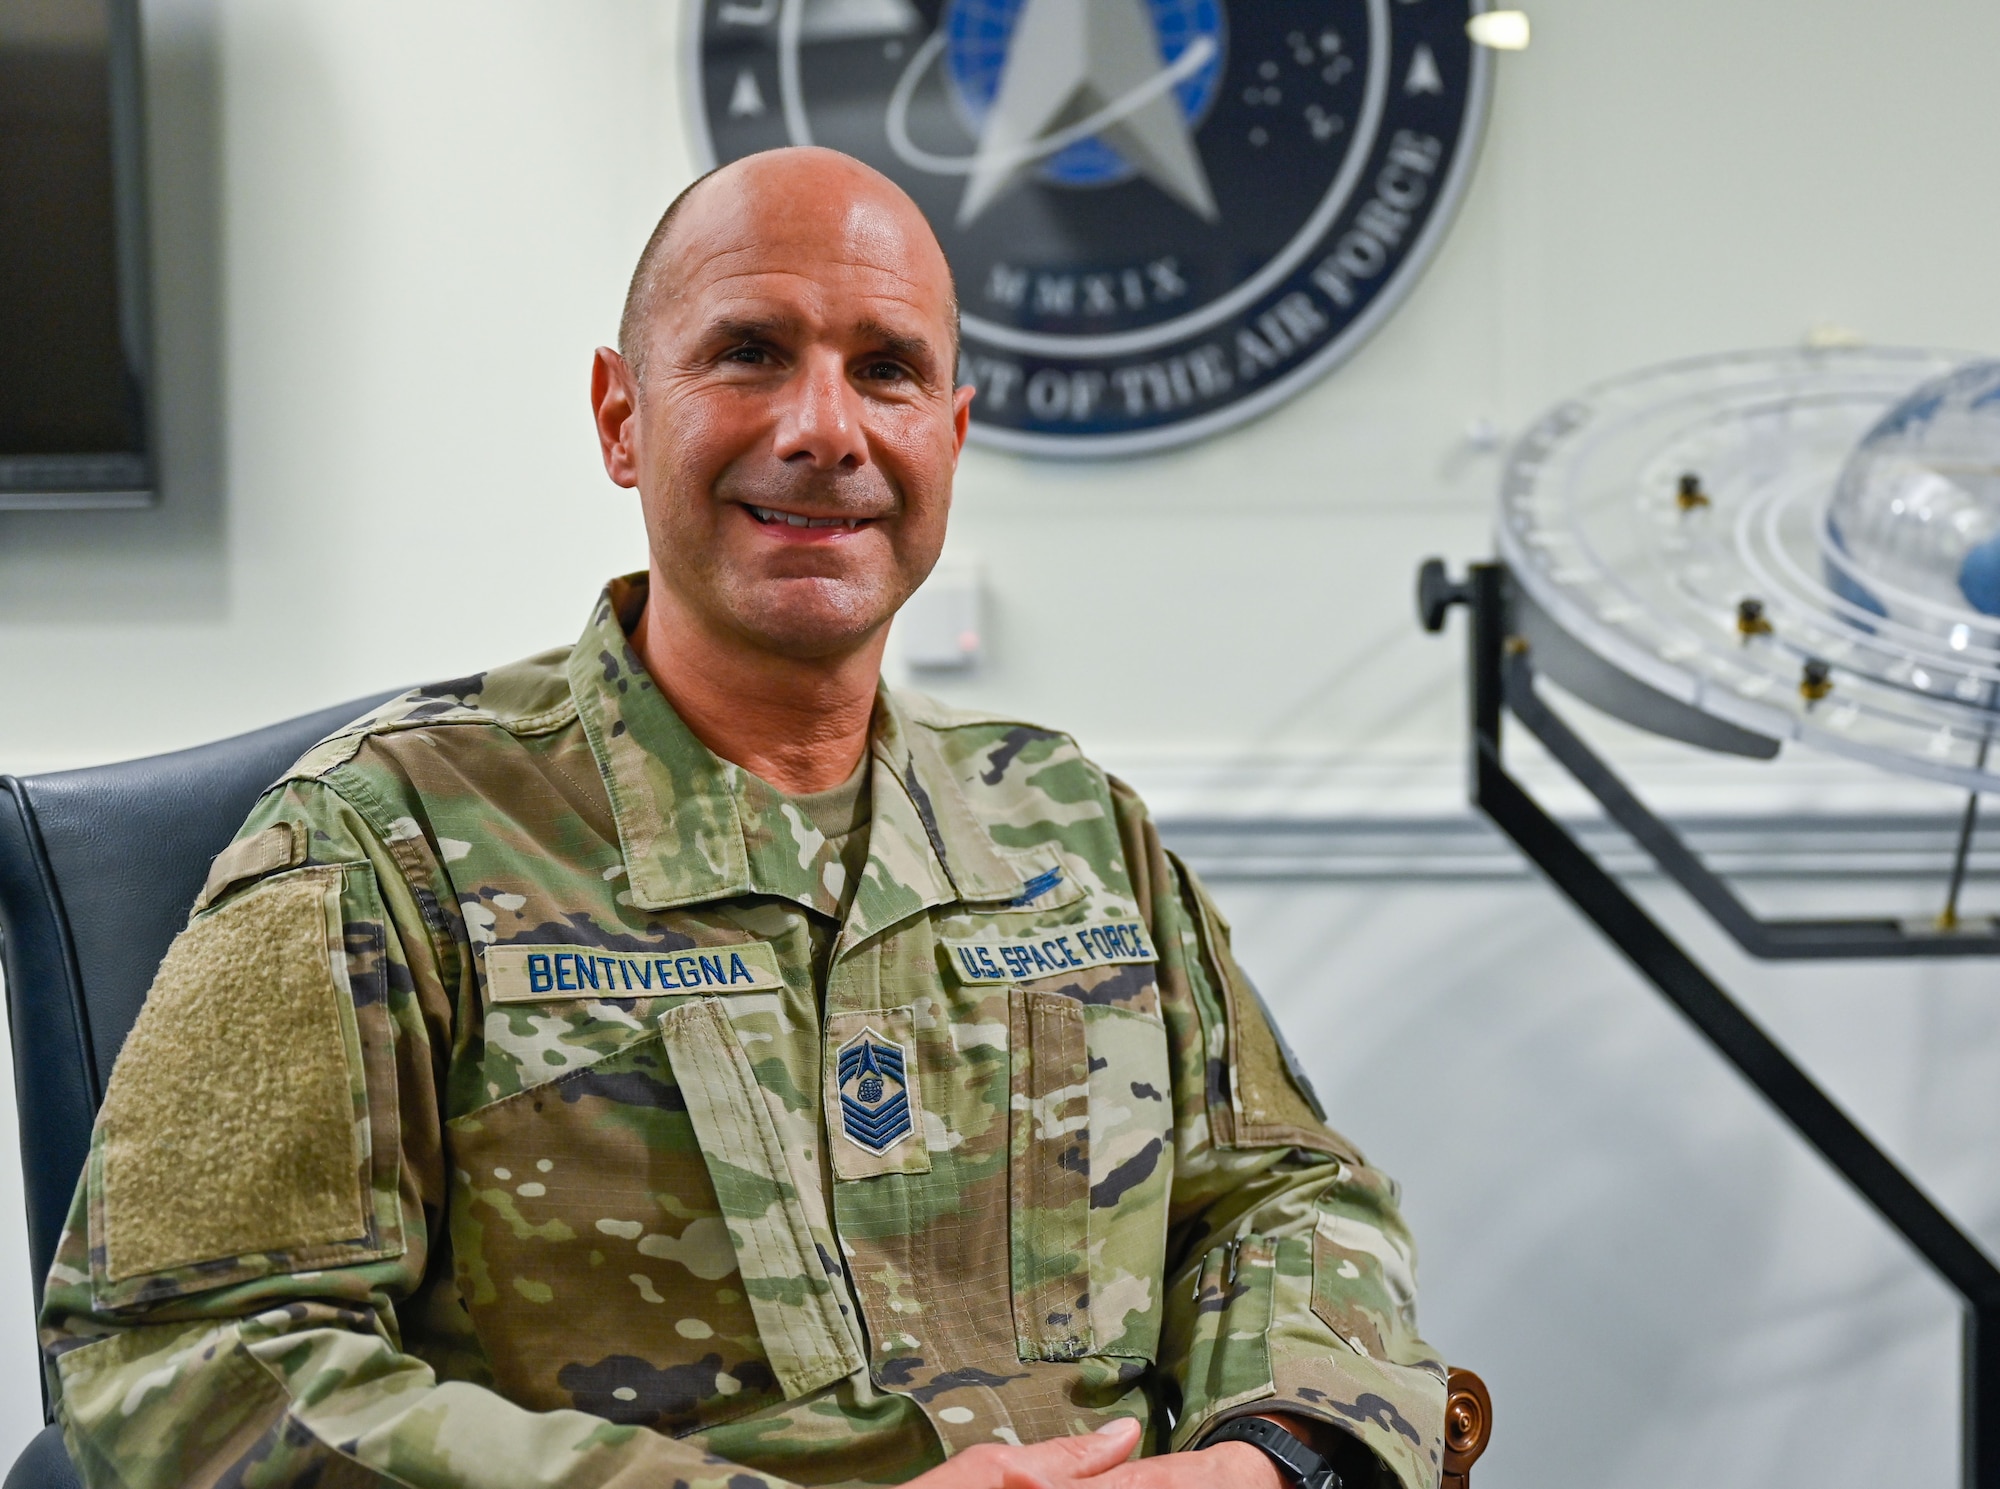 Chief Master Sgt. John F. Bentivegna poses for a photo after receiving news on his selection as the next Chief Master Sergeant of the Space Force, Pentagon, Arlington, Va., May 5, 2023. (U.S. Space Force photo by Senior Master Sgt. Sara Keller)